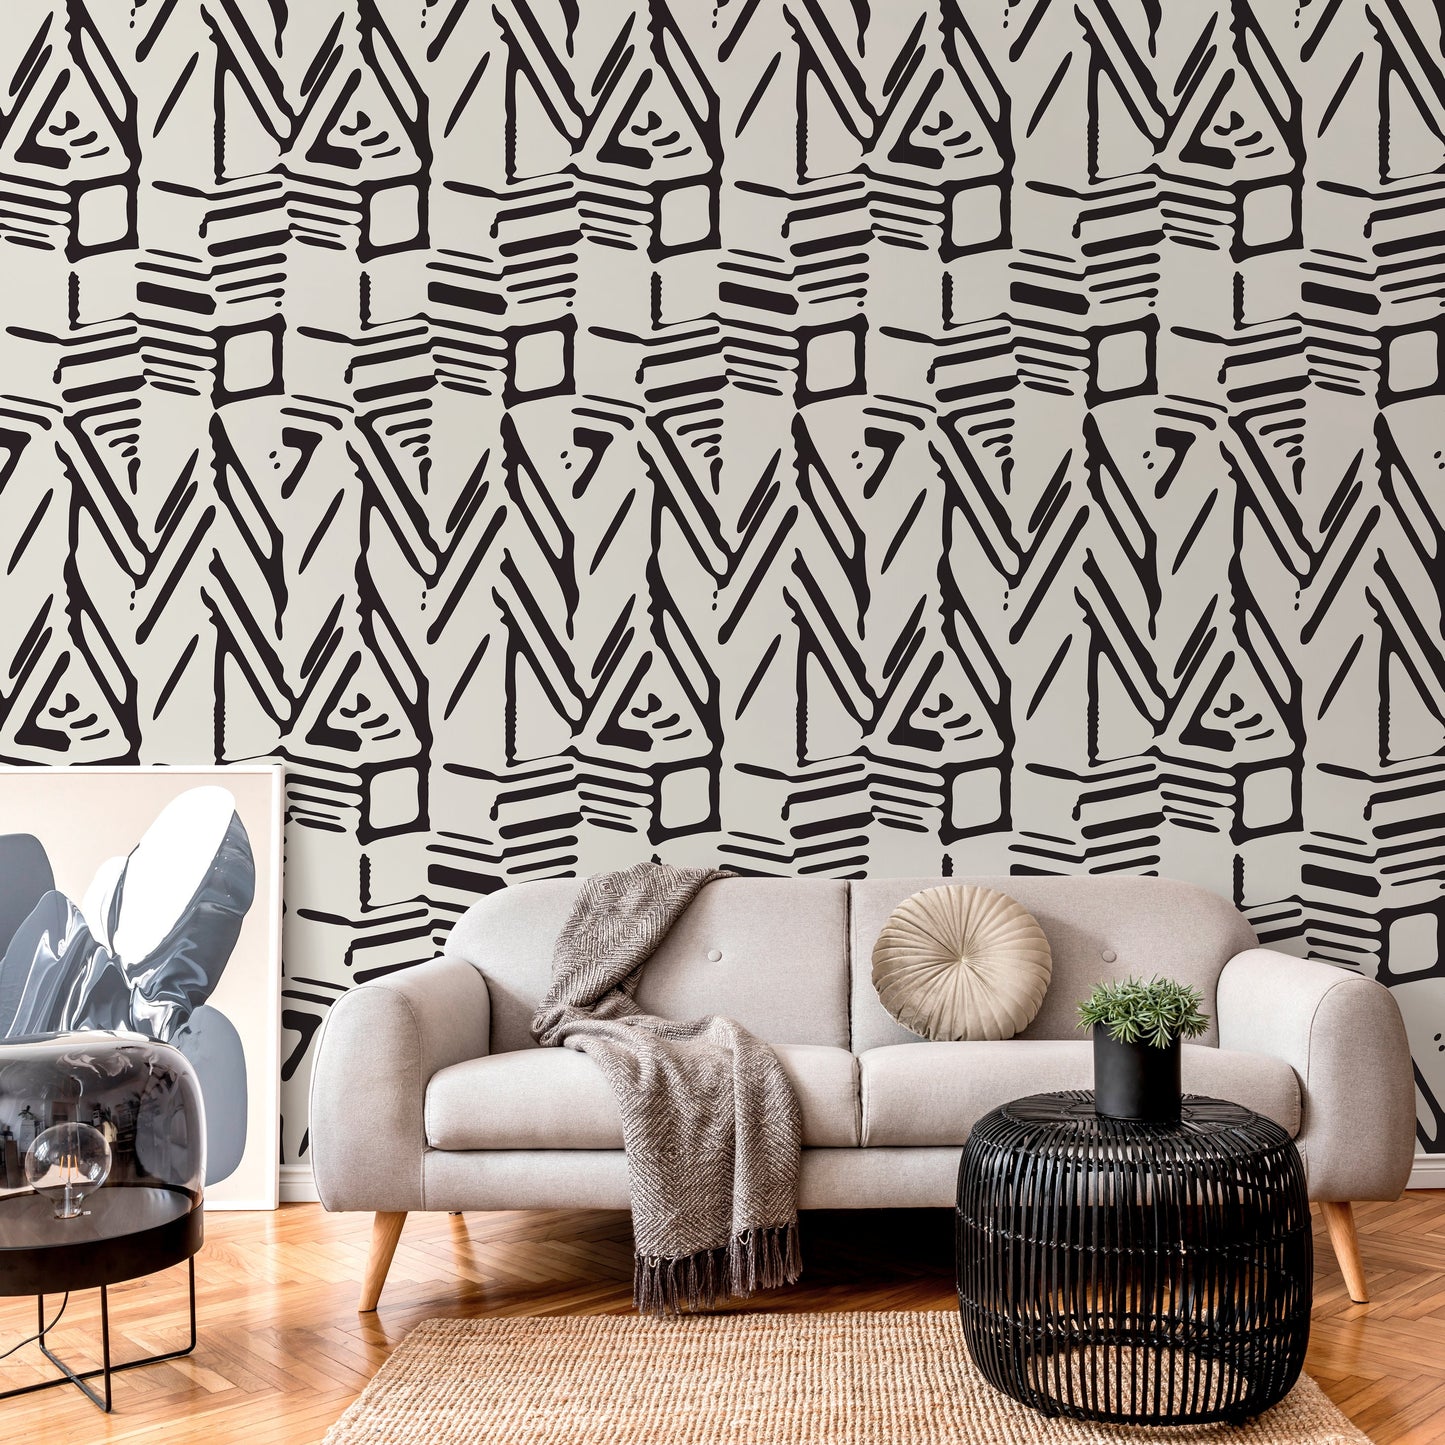 Wallpaper Peel and Stick Wallpaper Removable Wallpaper Home Decor Wall Art Wall Decor Room Decor / Black and Beige Abstract Wallpaper - C568